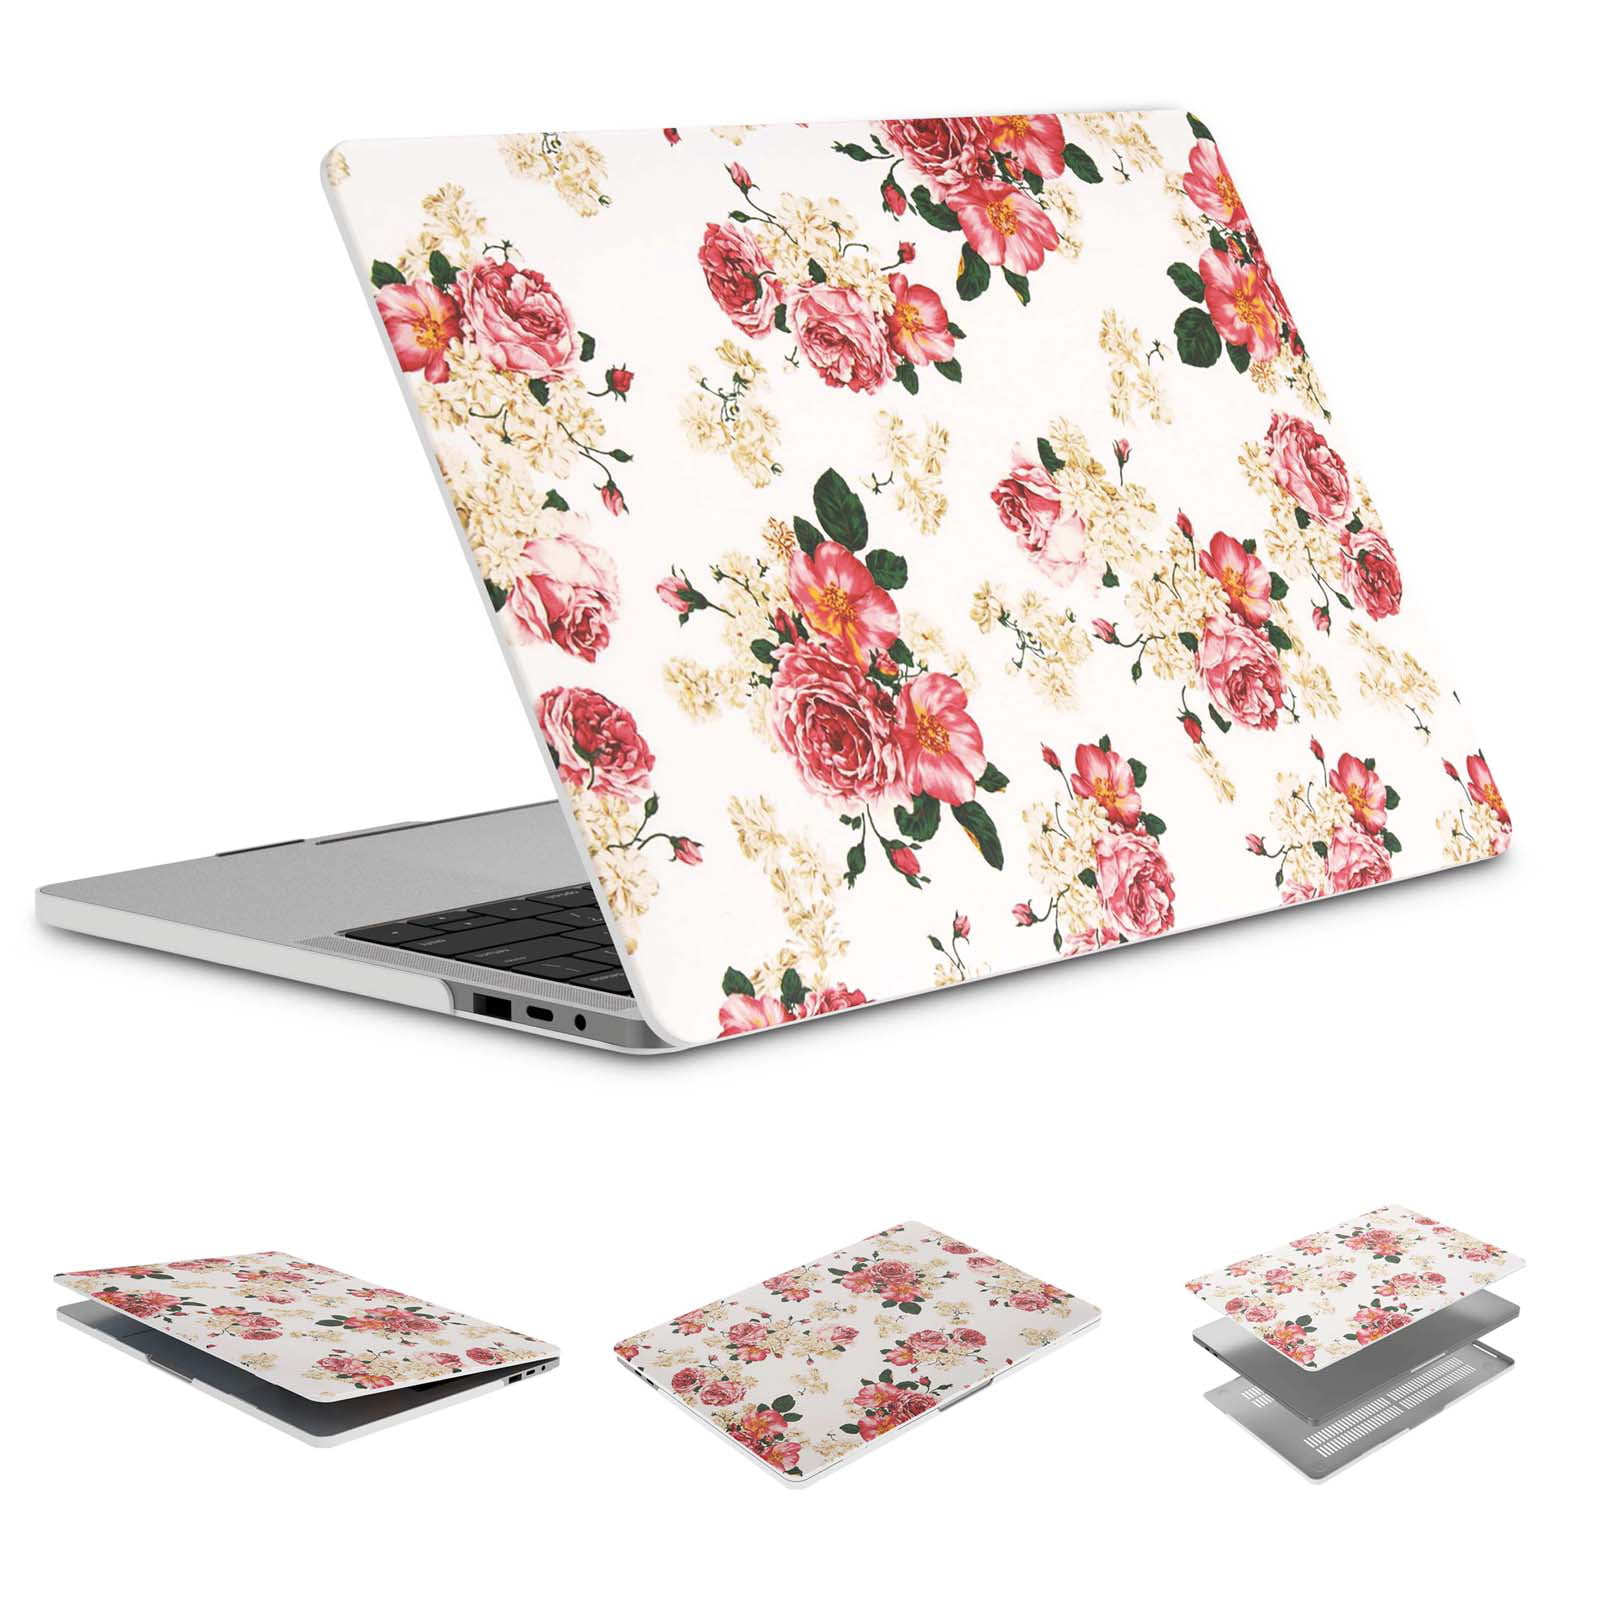 13inch MacBook Pro Case Women Shoes Series with Floral Decorative Floral Beauty Retro Art Plastic Hard Shell Compatible Mac Air 11 Pro 13 15 Mac Pro Laptop Case Protection for MacBook 